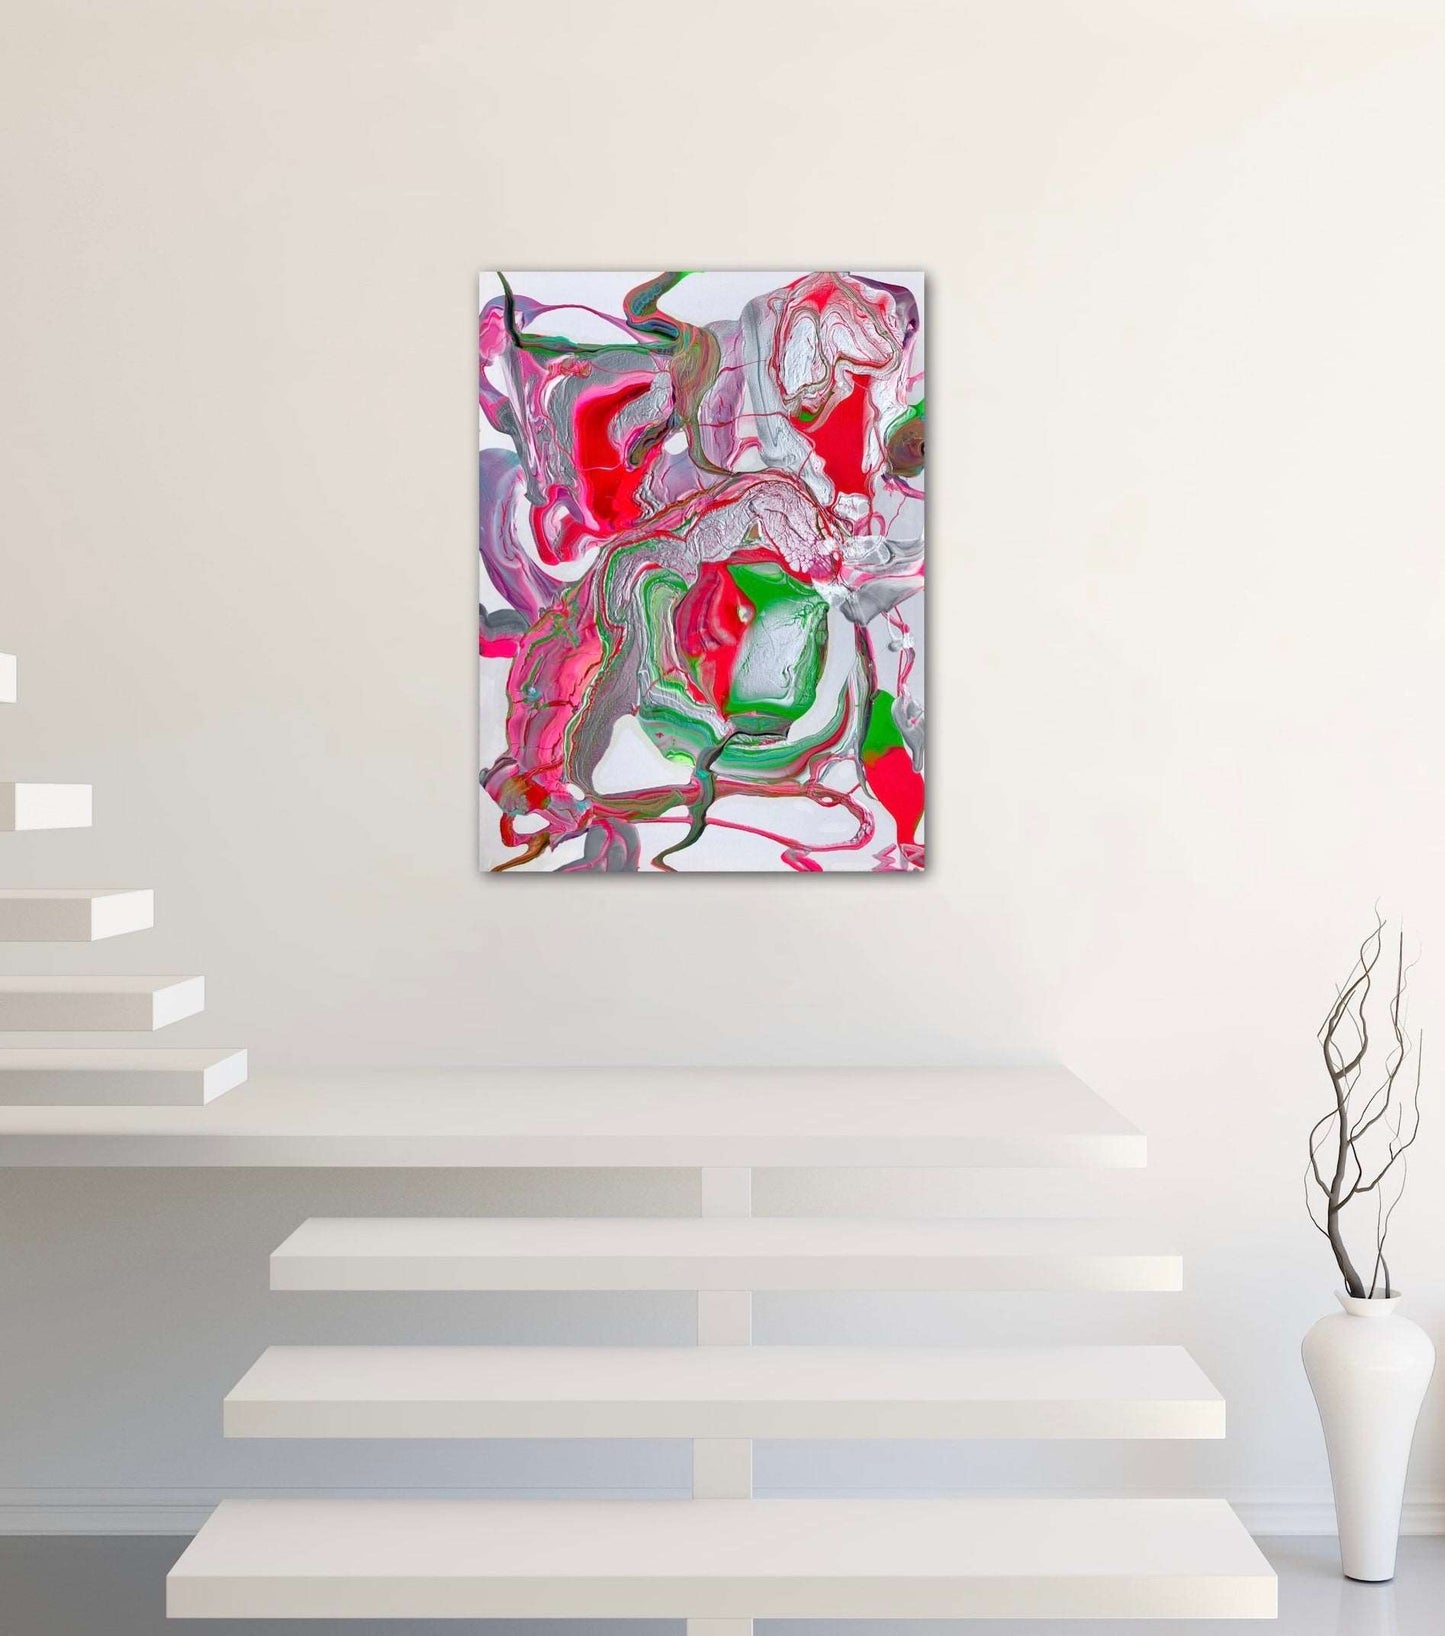 Angelic - Original acrylic design on a canvas, by artwithevie